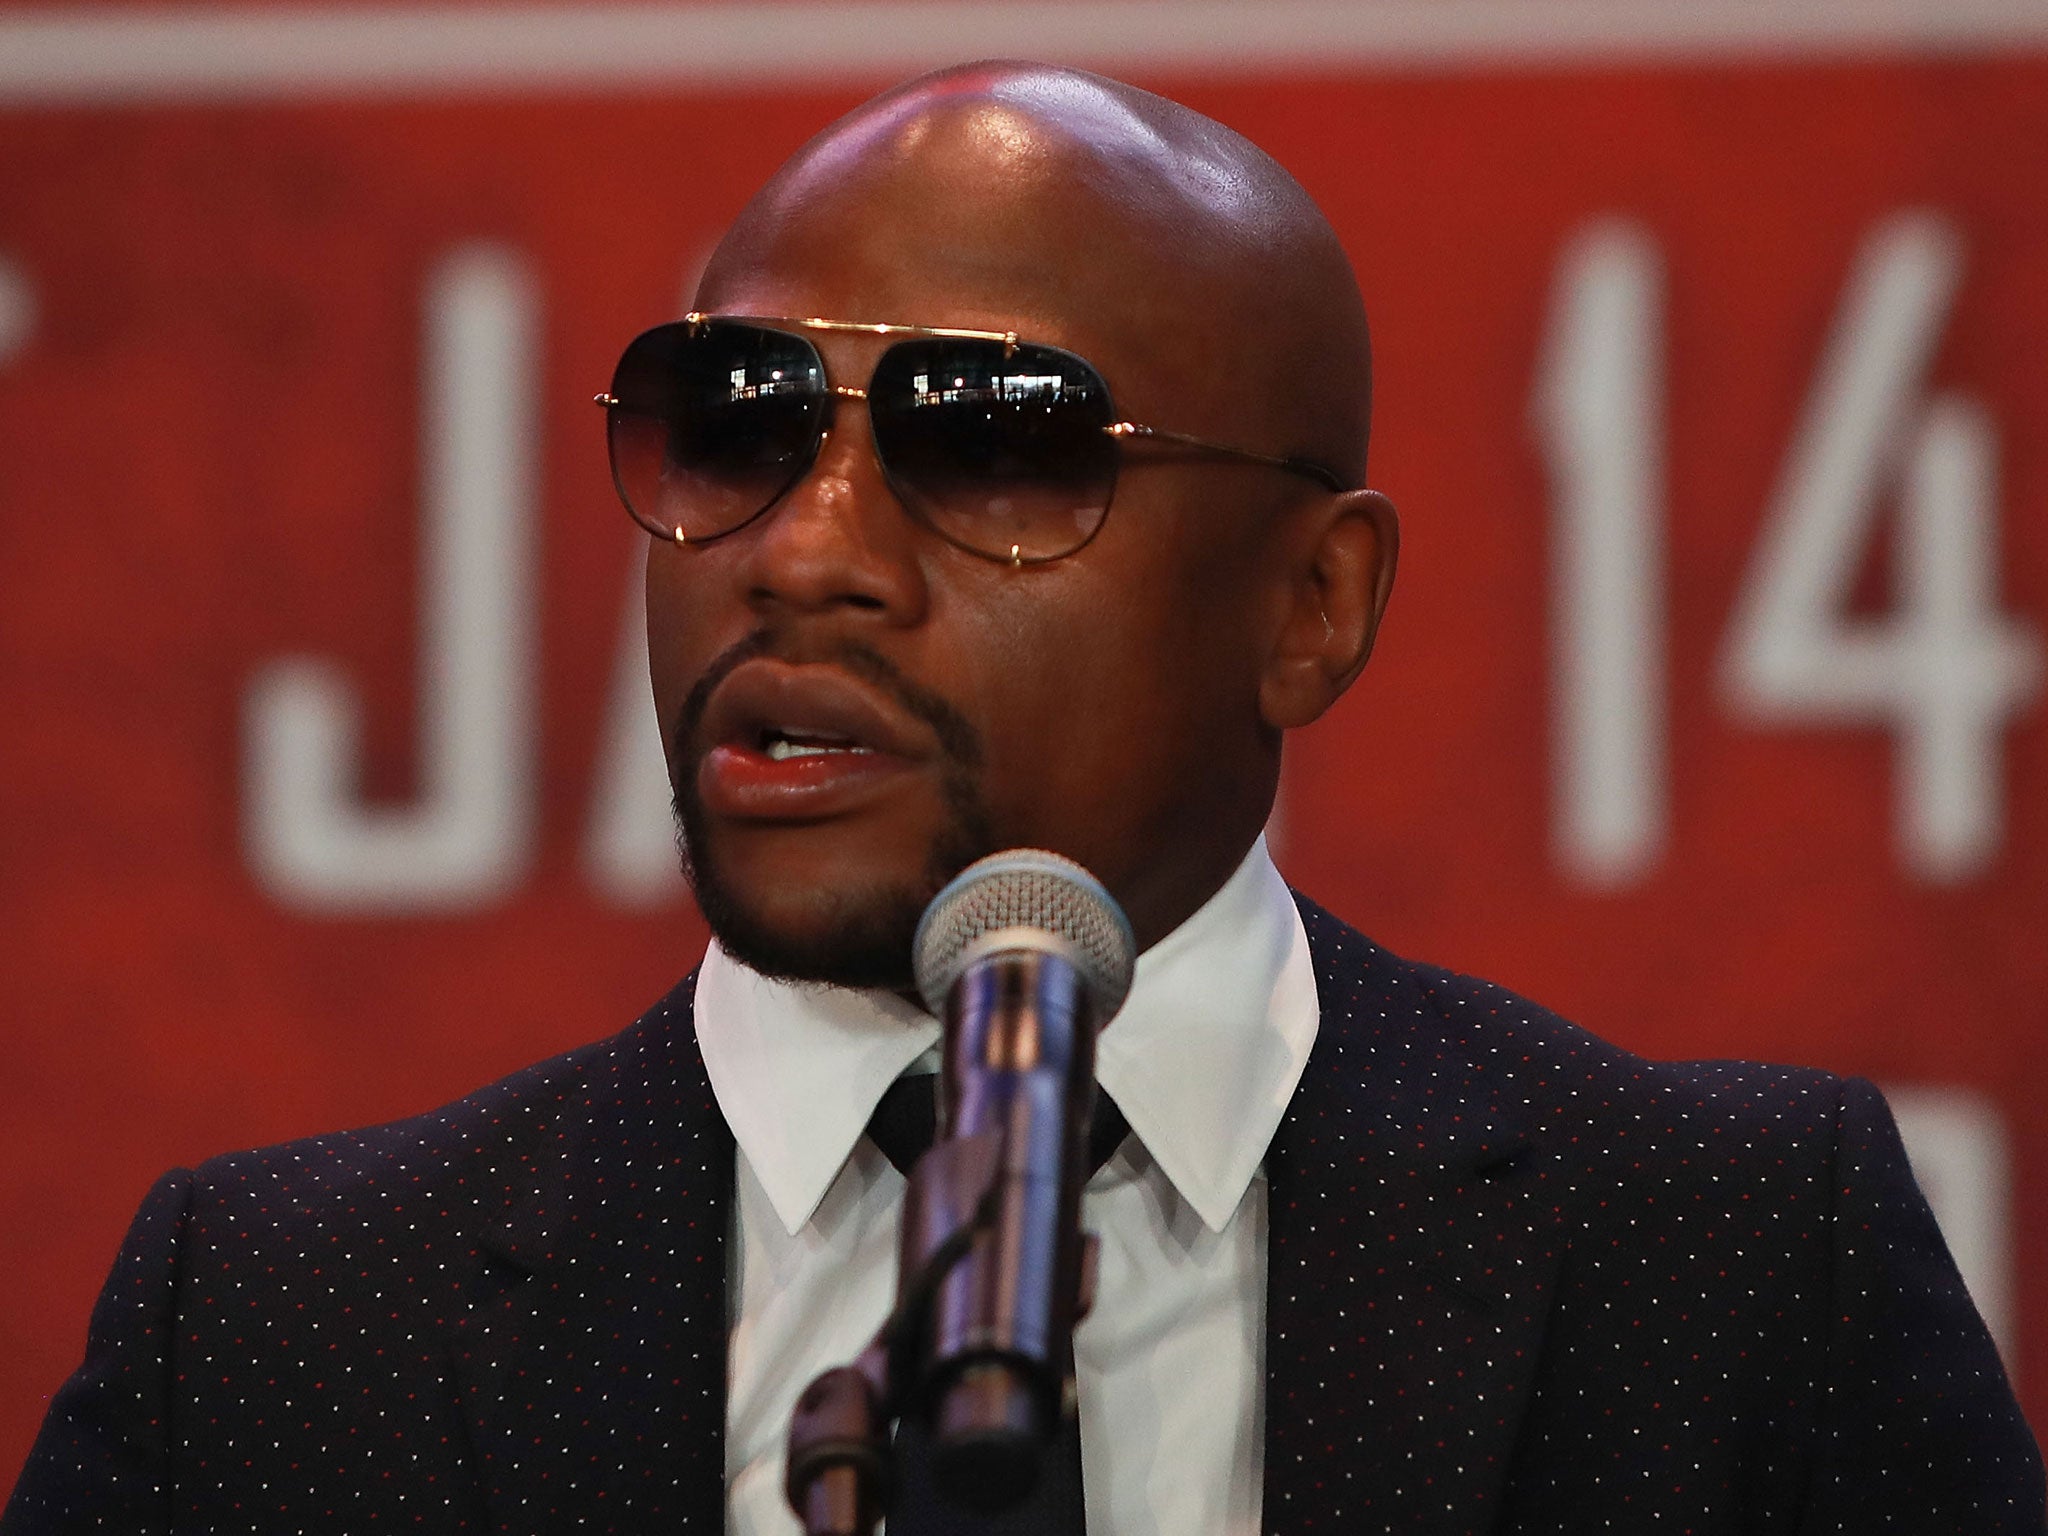 &#13;
Mayweather is locked in a war of words with McGregor about a potential 'superfight' &#13;